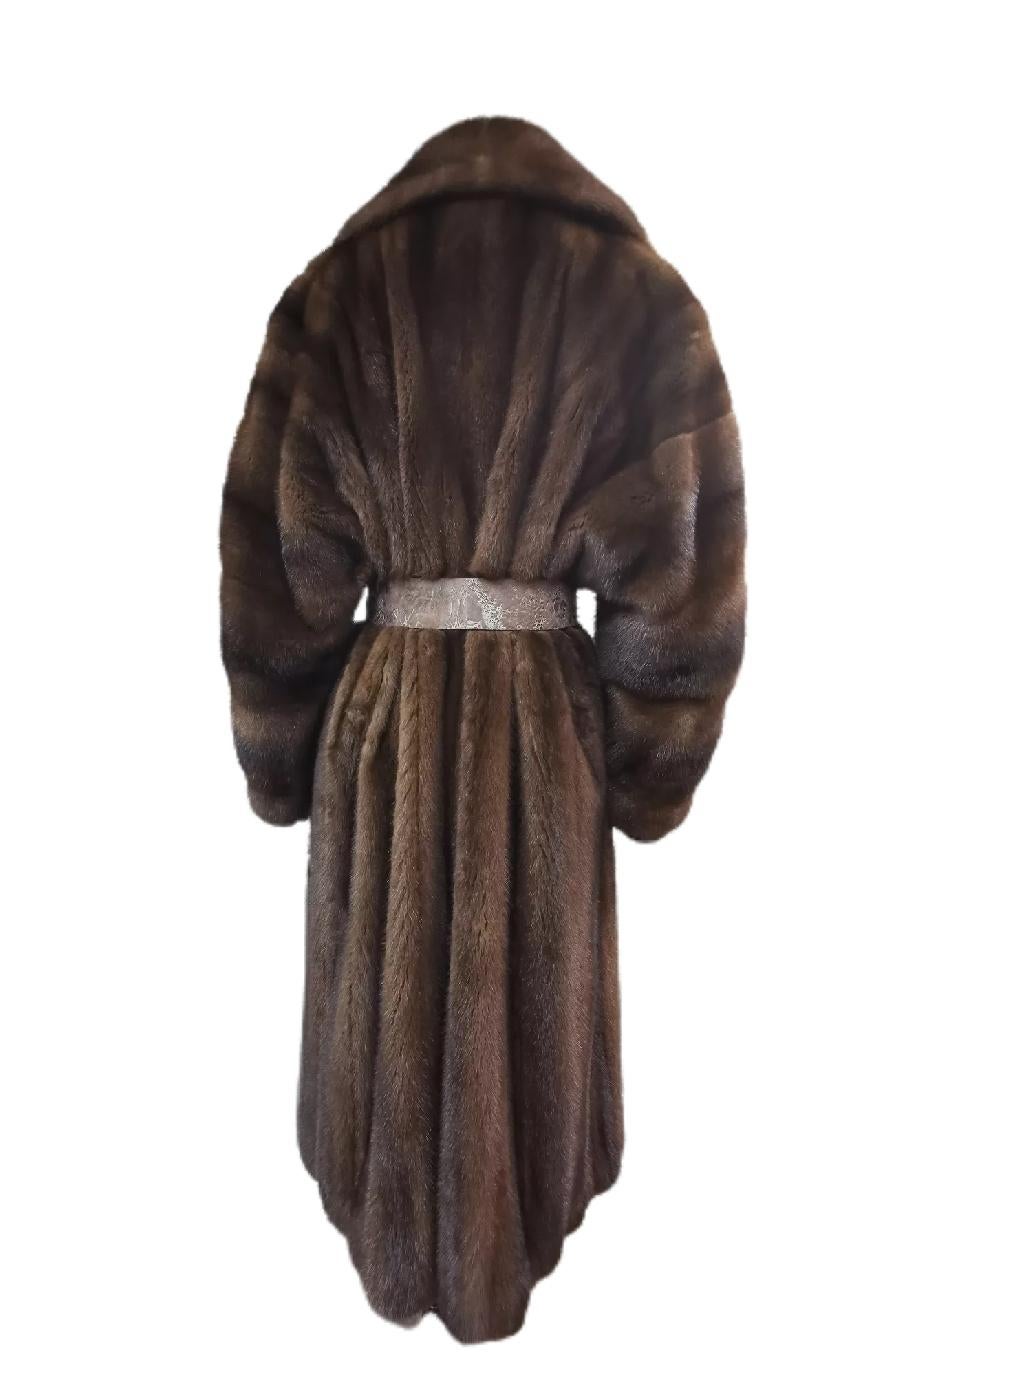 Christian dior mink fur coat size 18 In Excellent Condition For Sale In Montreal, Quebec